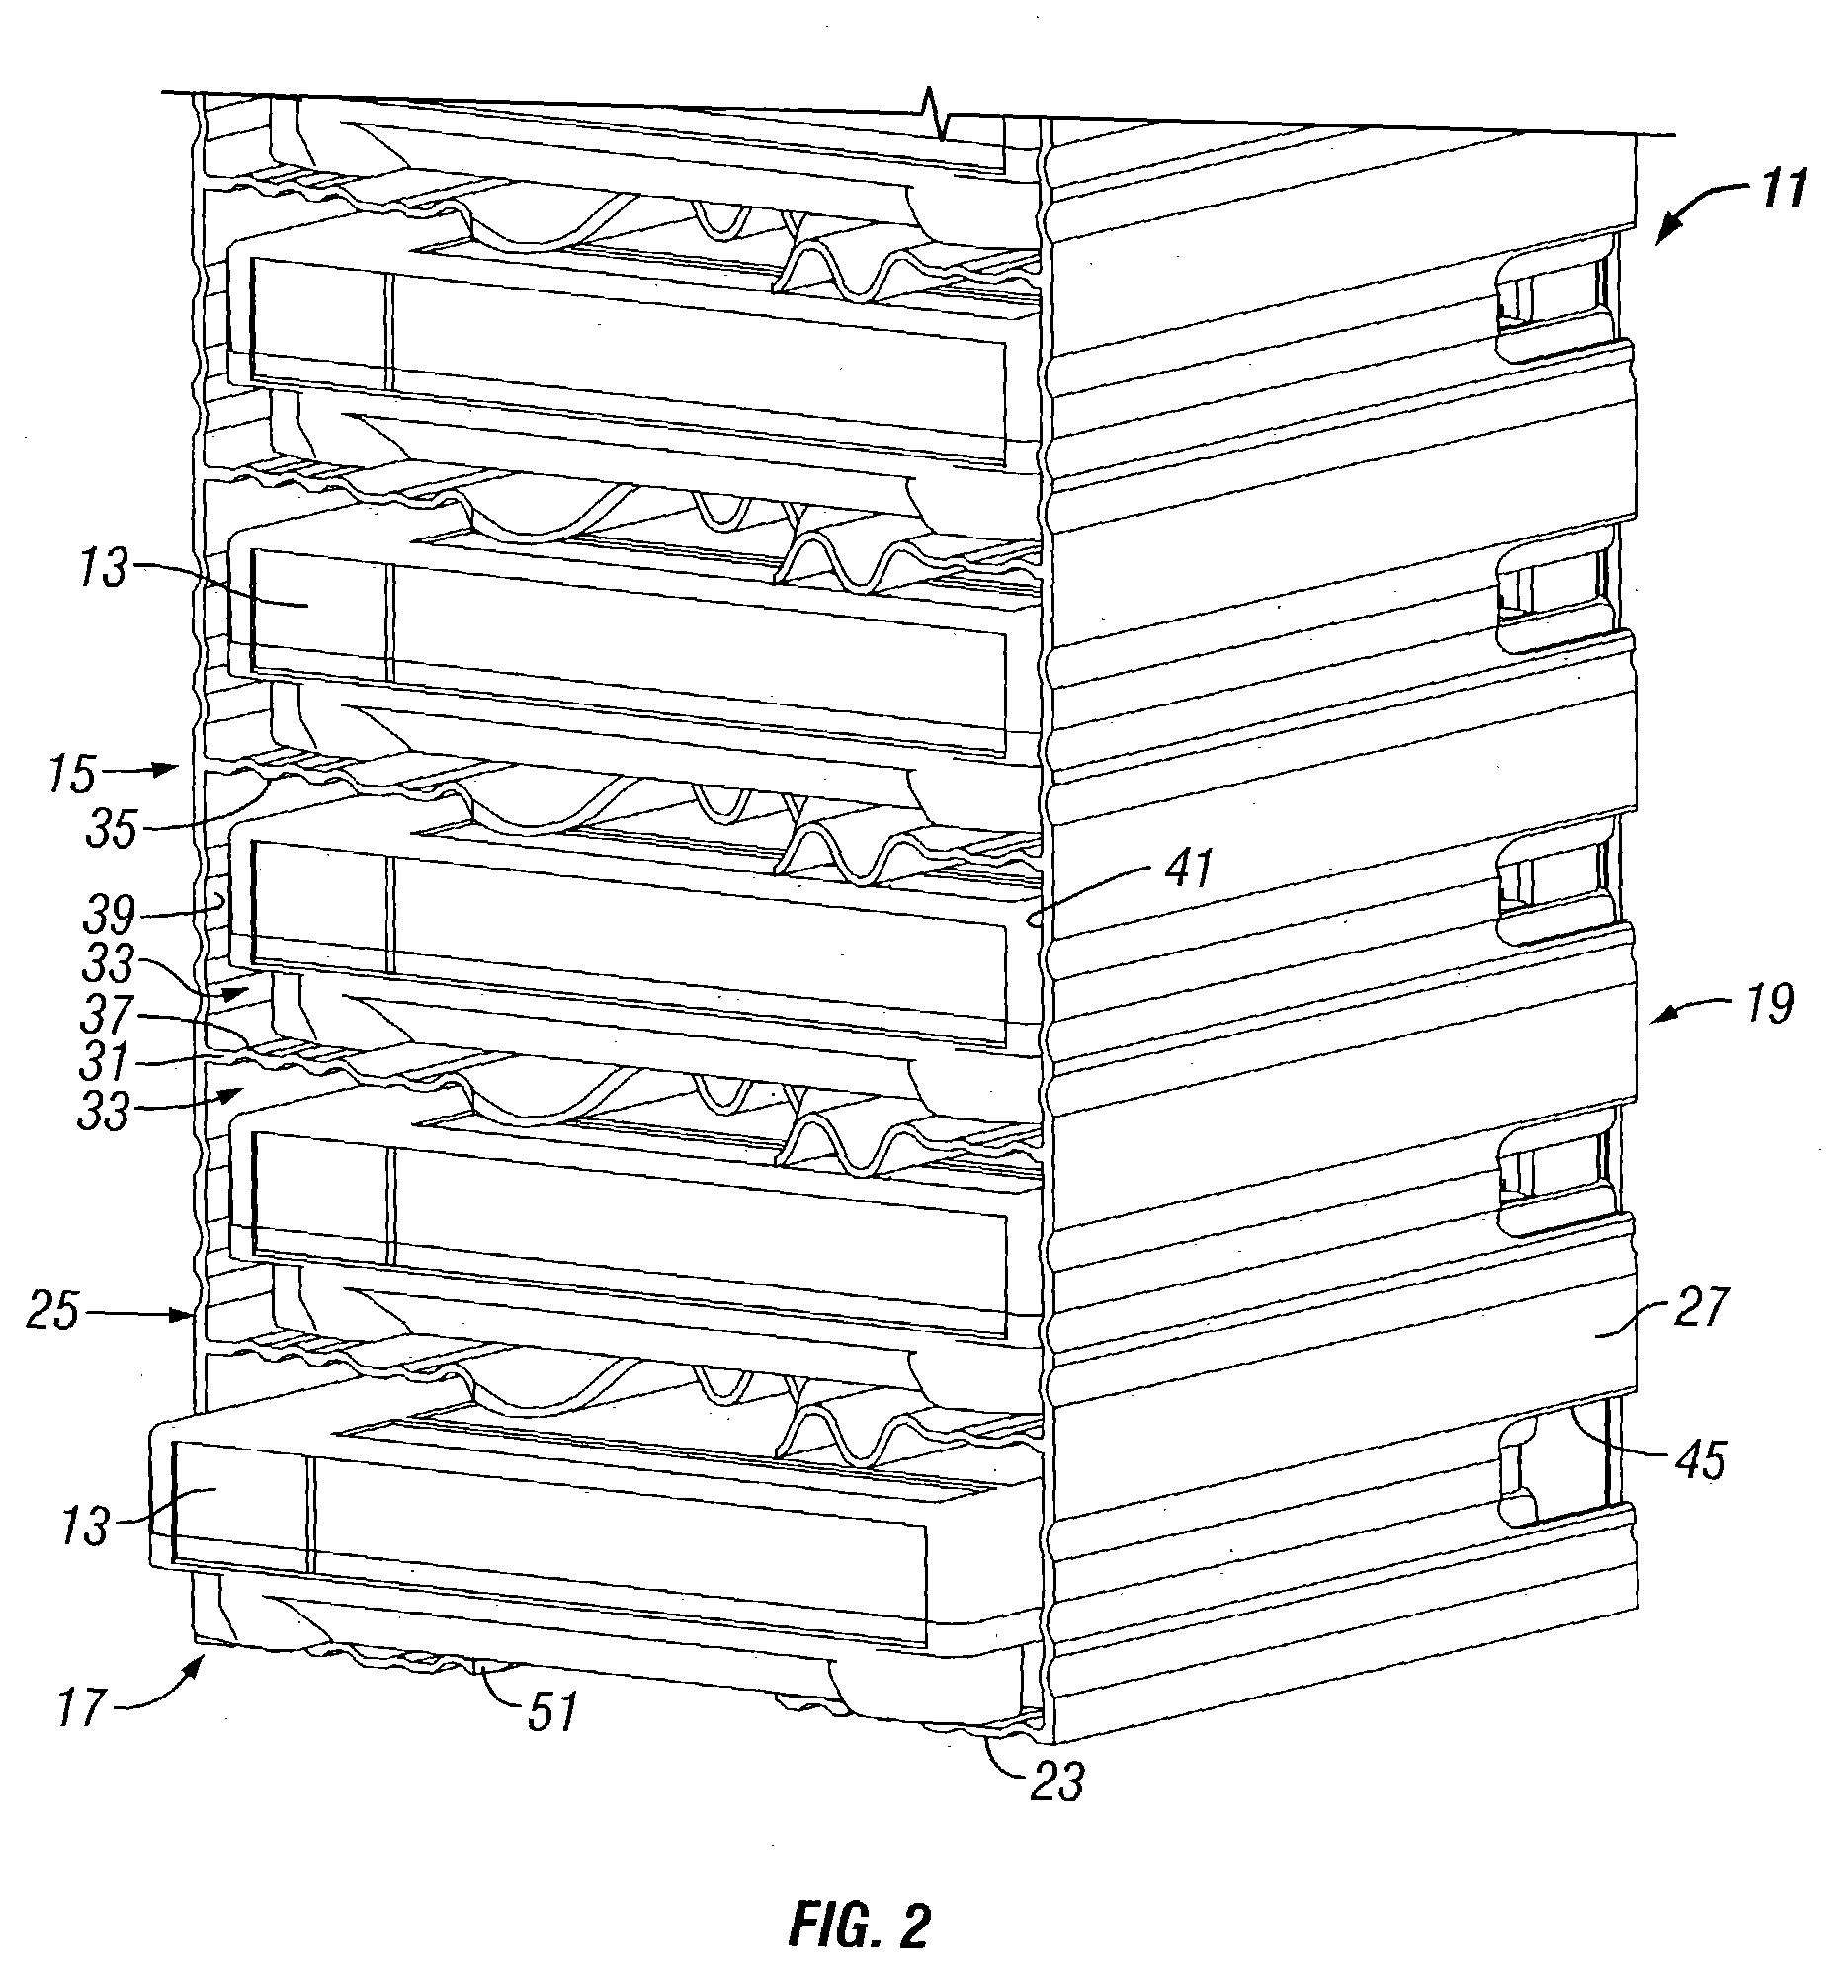 System, method, and apparatus for improved packaging of data tape cartridges